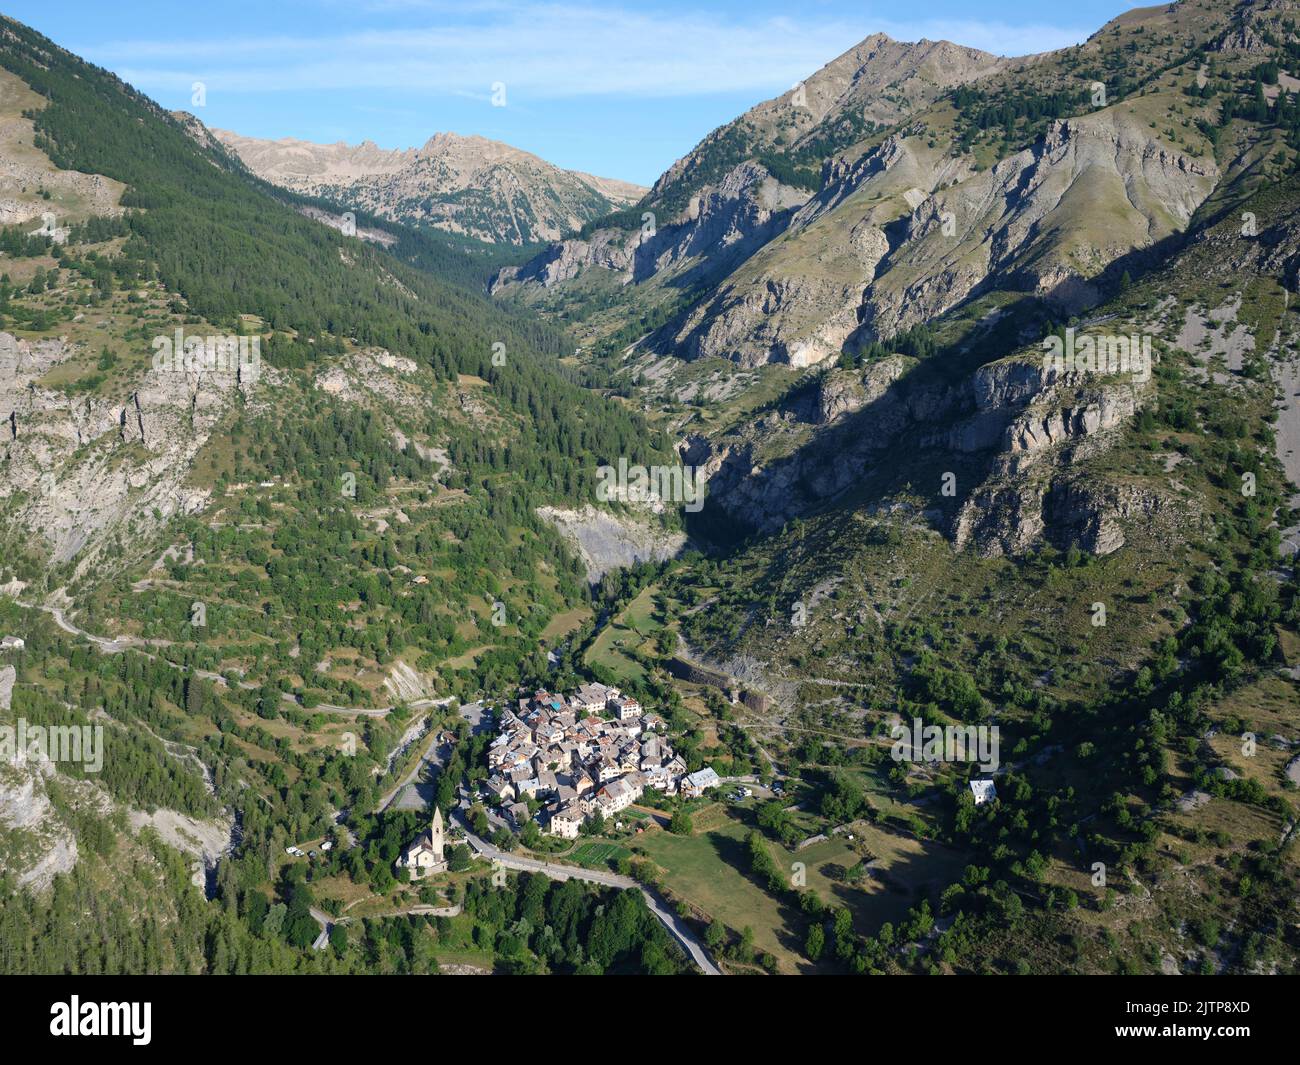 AERIAL VIEW. Small village in the Tinée Valley at the foothills of the Mercantour National Park. Alpes-Maritimes, Provence-Alpes-Côte d'Azur, France. Stock Photo